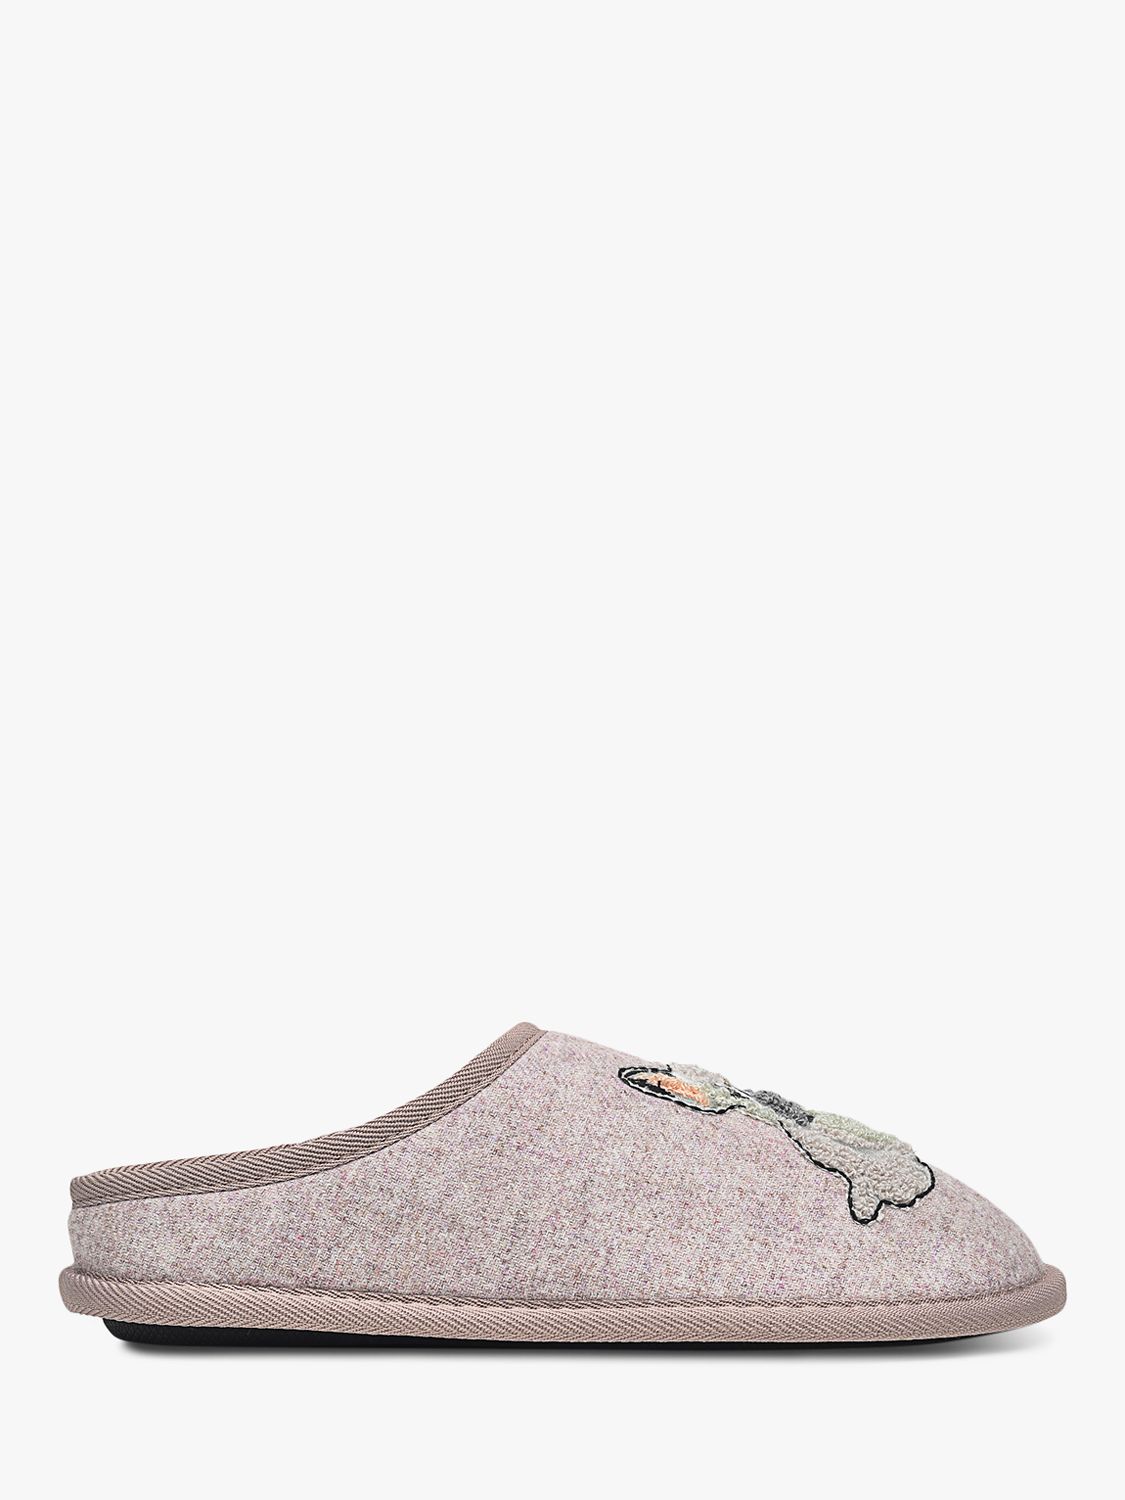 Buy Radley Rose The Frenchie Mule Slippers, Pink Online at johnlewis.com